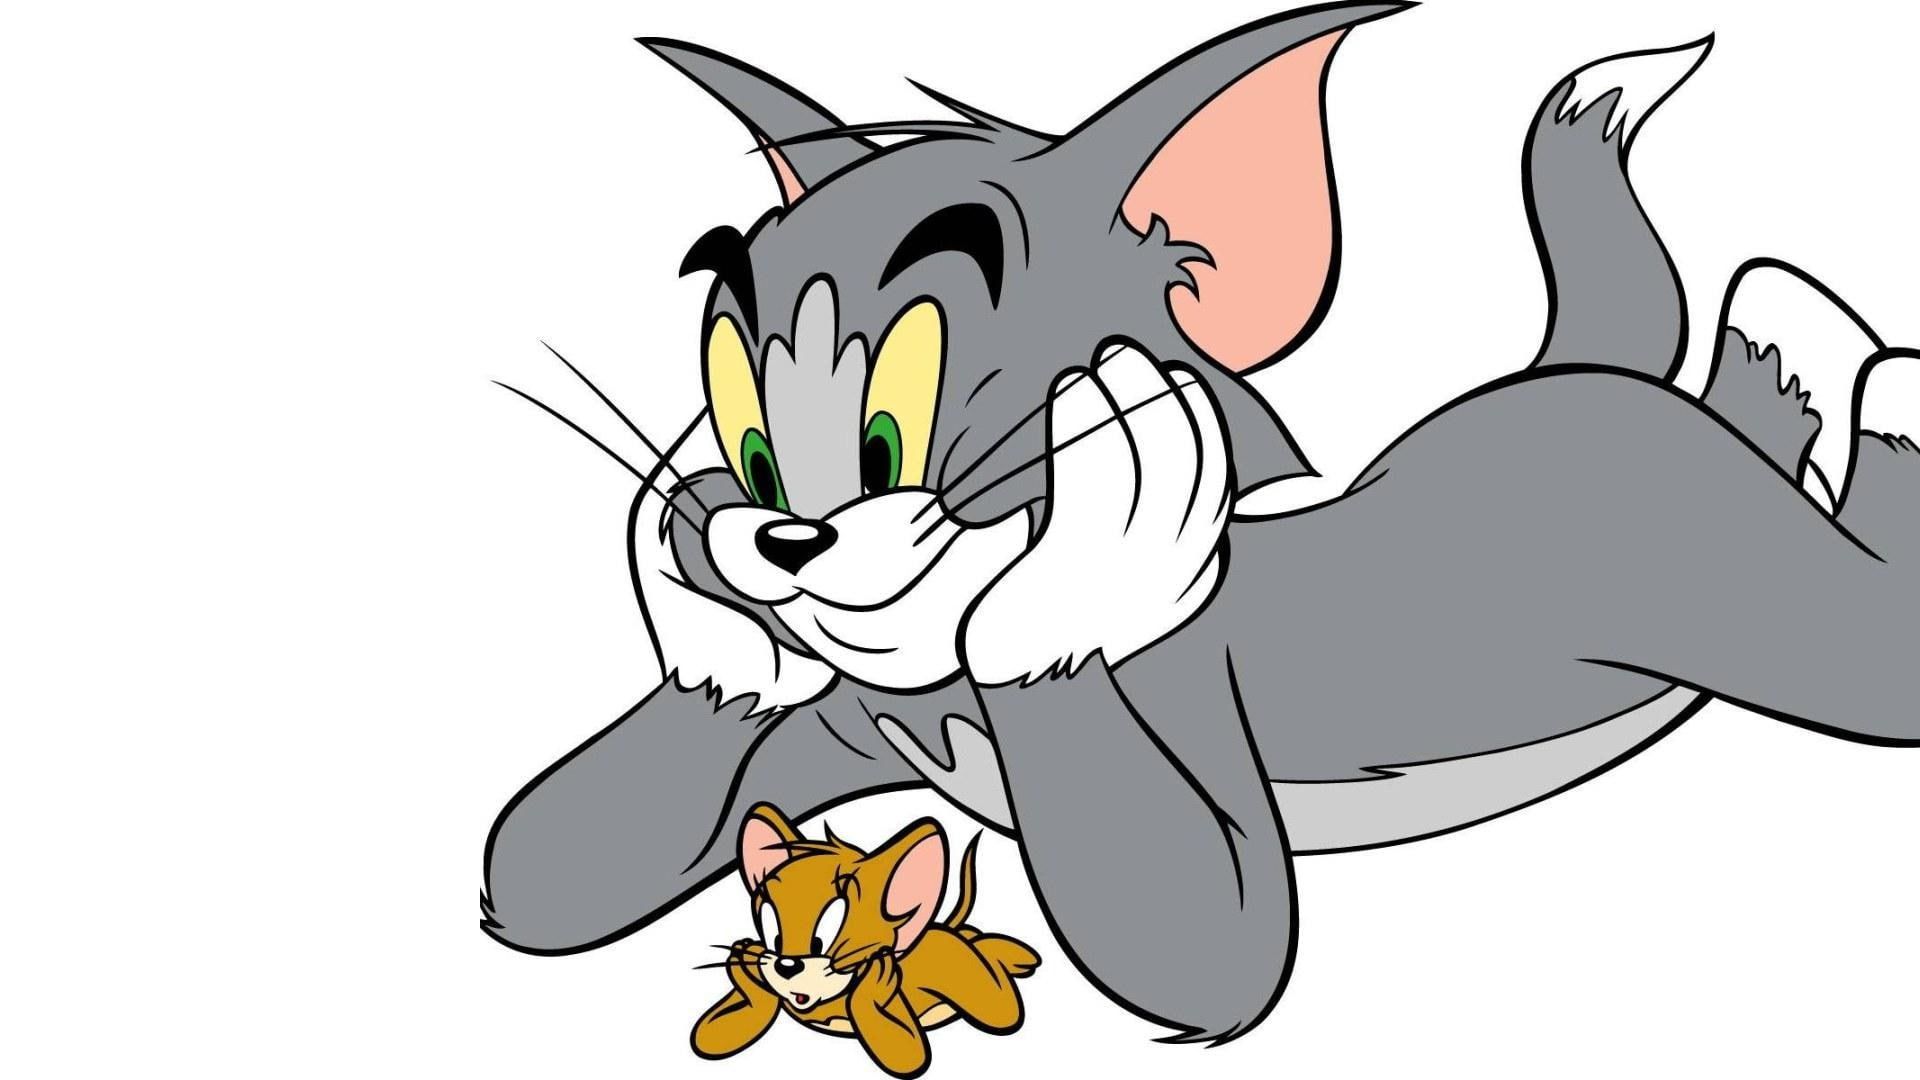 Tom and Jerry wallpaper 1920x1080 for mobile phone - Tom and Jerry